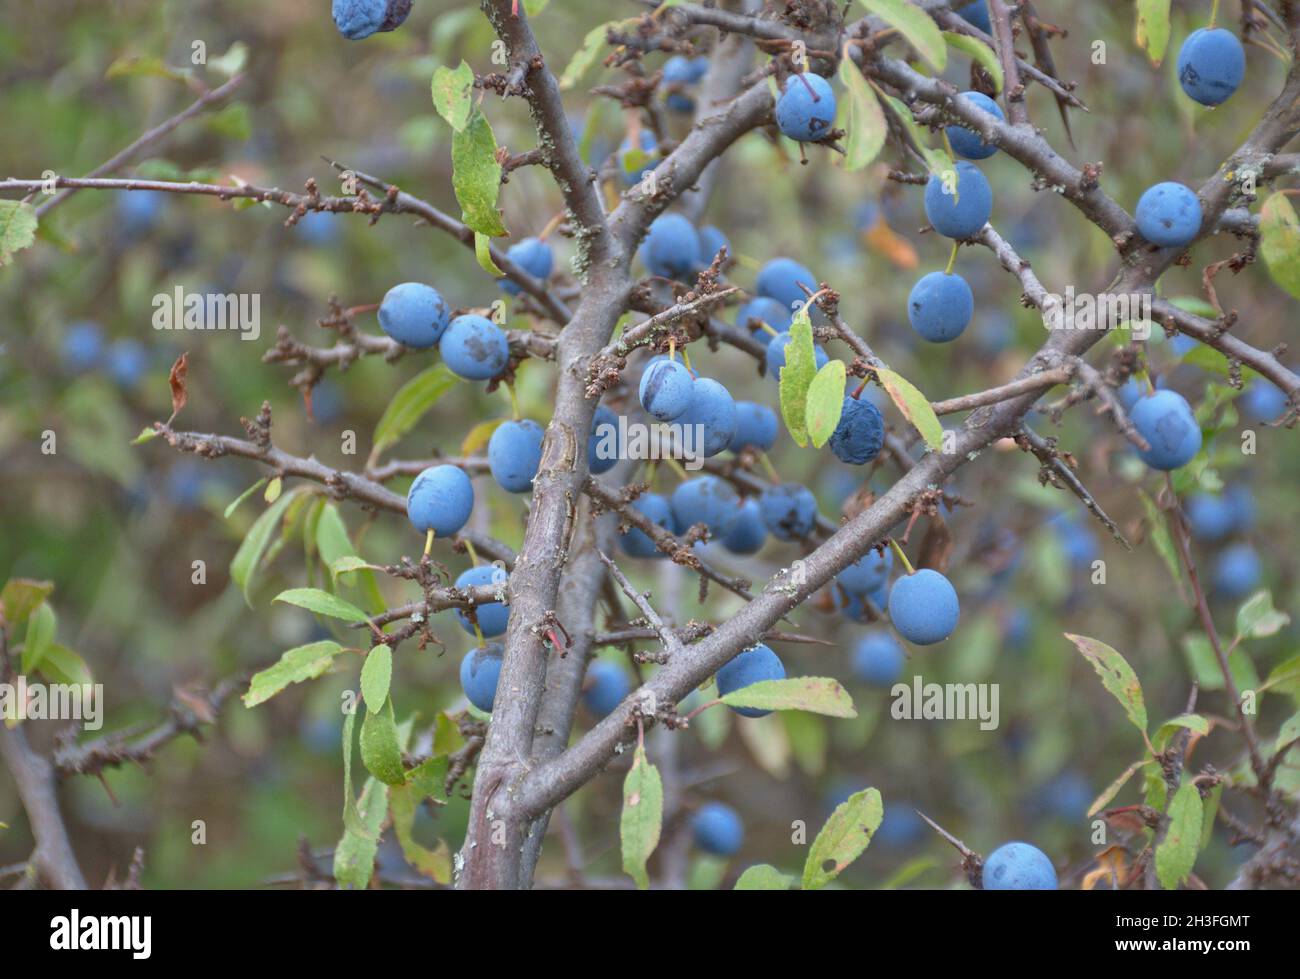 Blackthorn Prunus spinosa with ripe fruit in late summer. Rosaceae family shrub, known for the liquor made with its fruits. La Rioja, Spain. Stock Photo